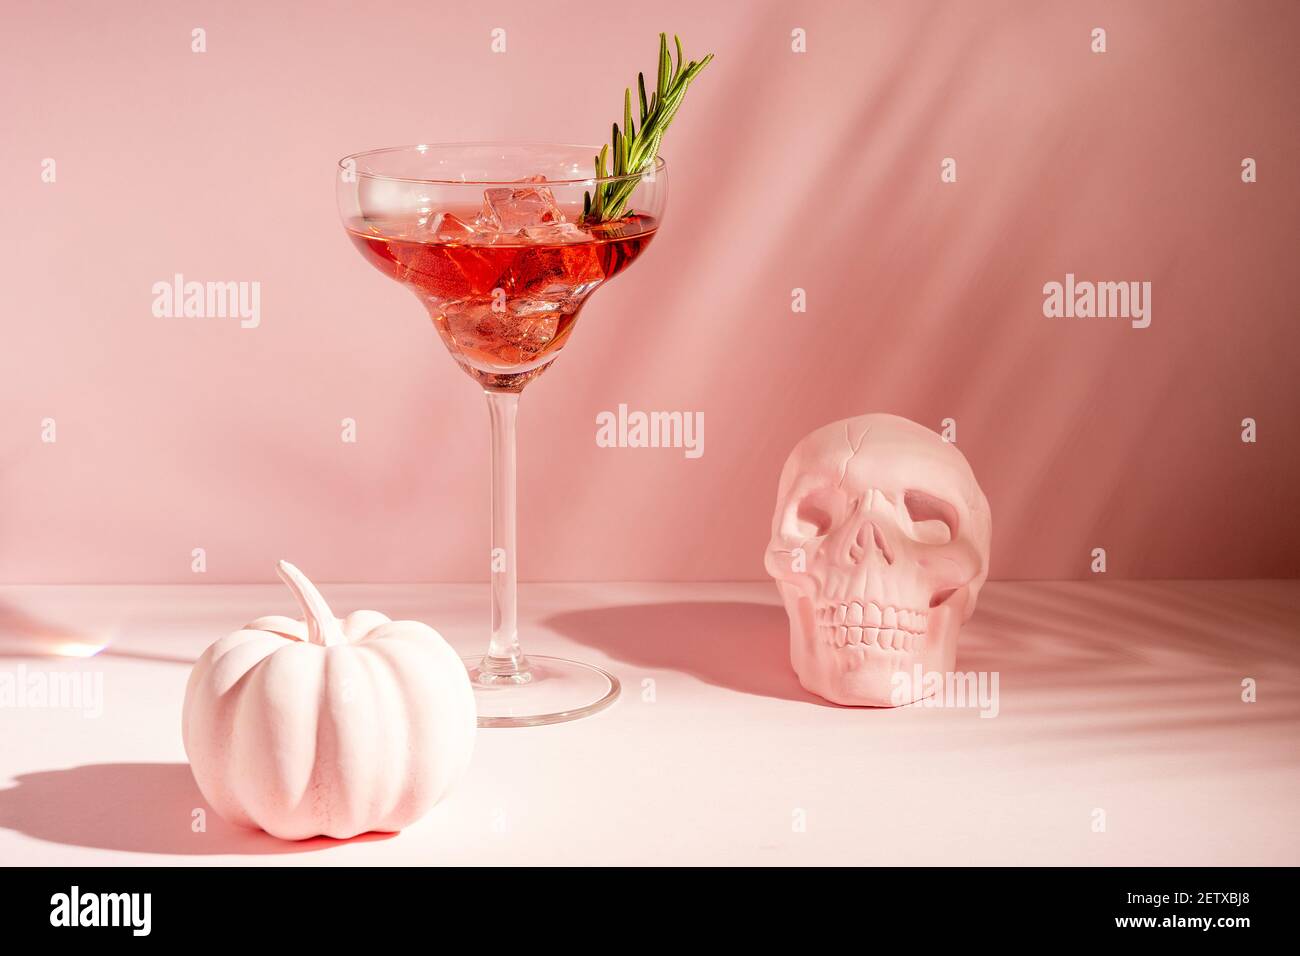 Halloween minimal concept with pink pumpkin, skull and cocktail. Creative holiday party background. Stock Photo